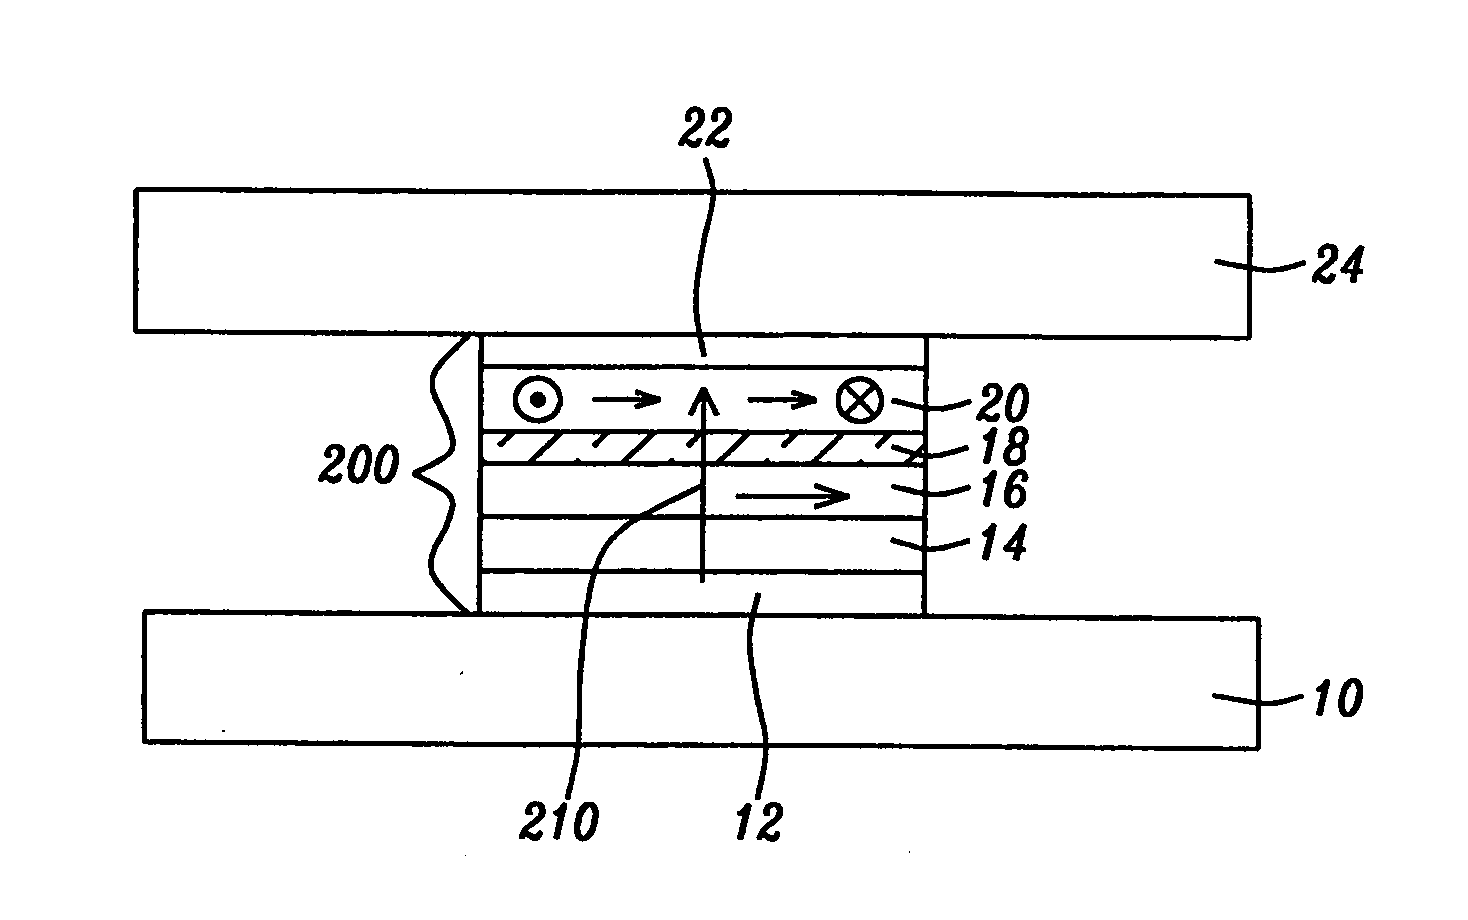 CPP magnetic recording head with self-stabilizing vortex configuration